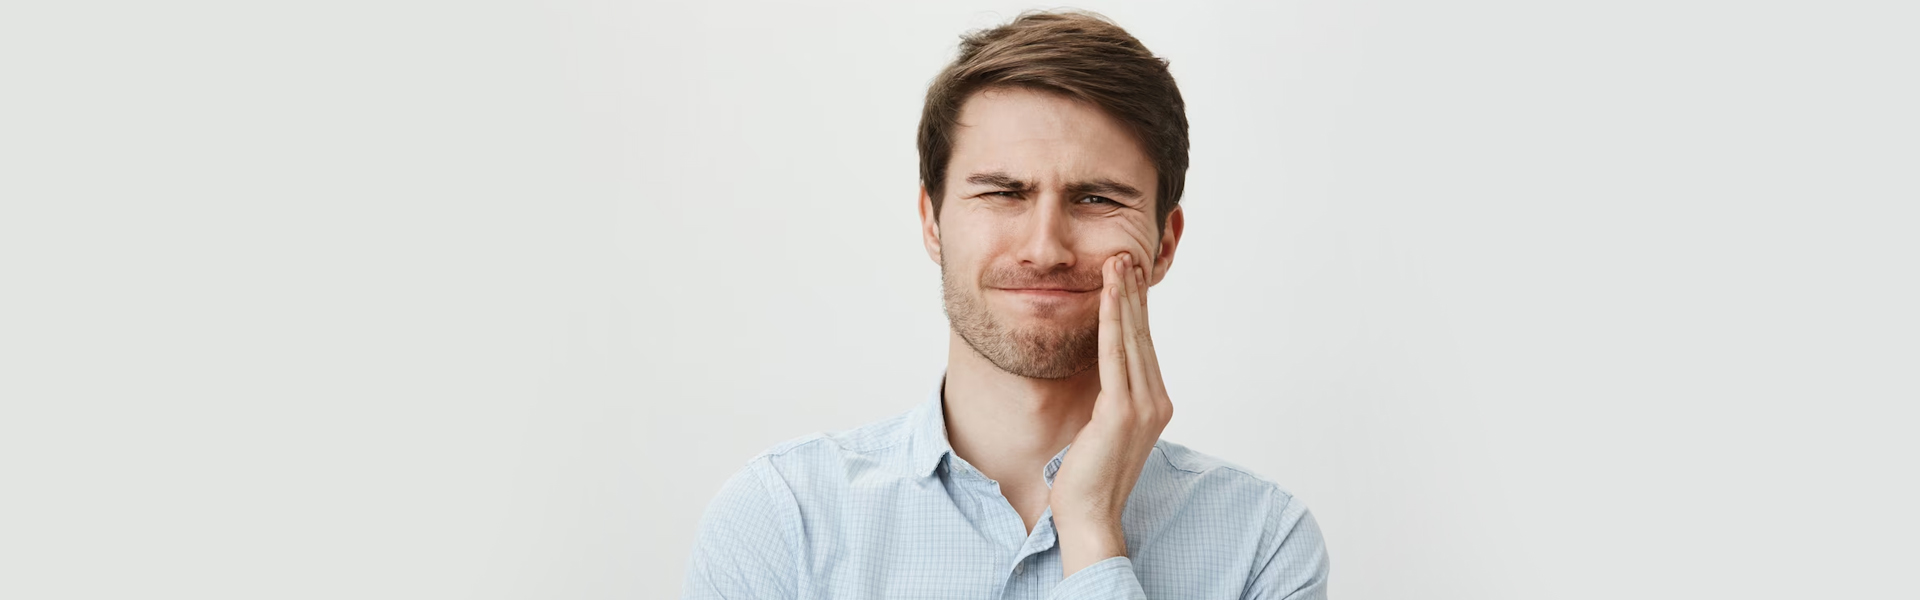 11 Wisdom Teeth Removal Recovery Tips